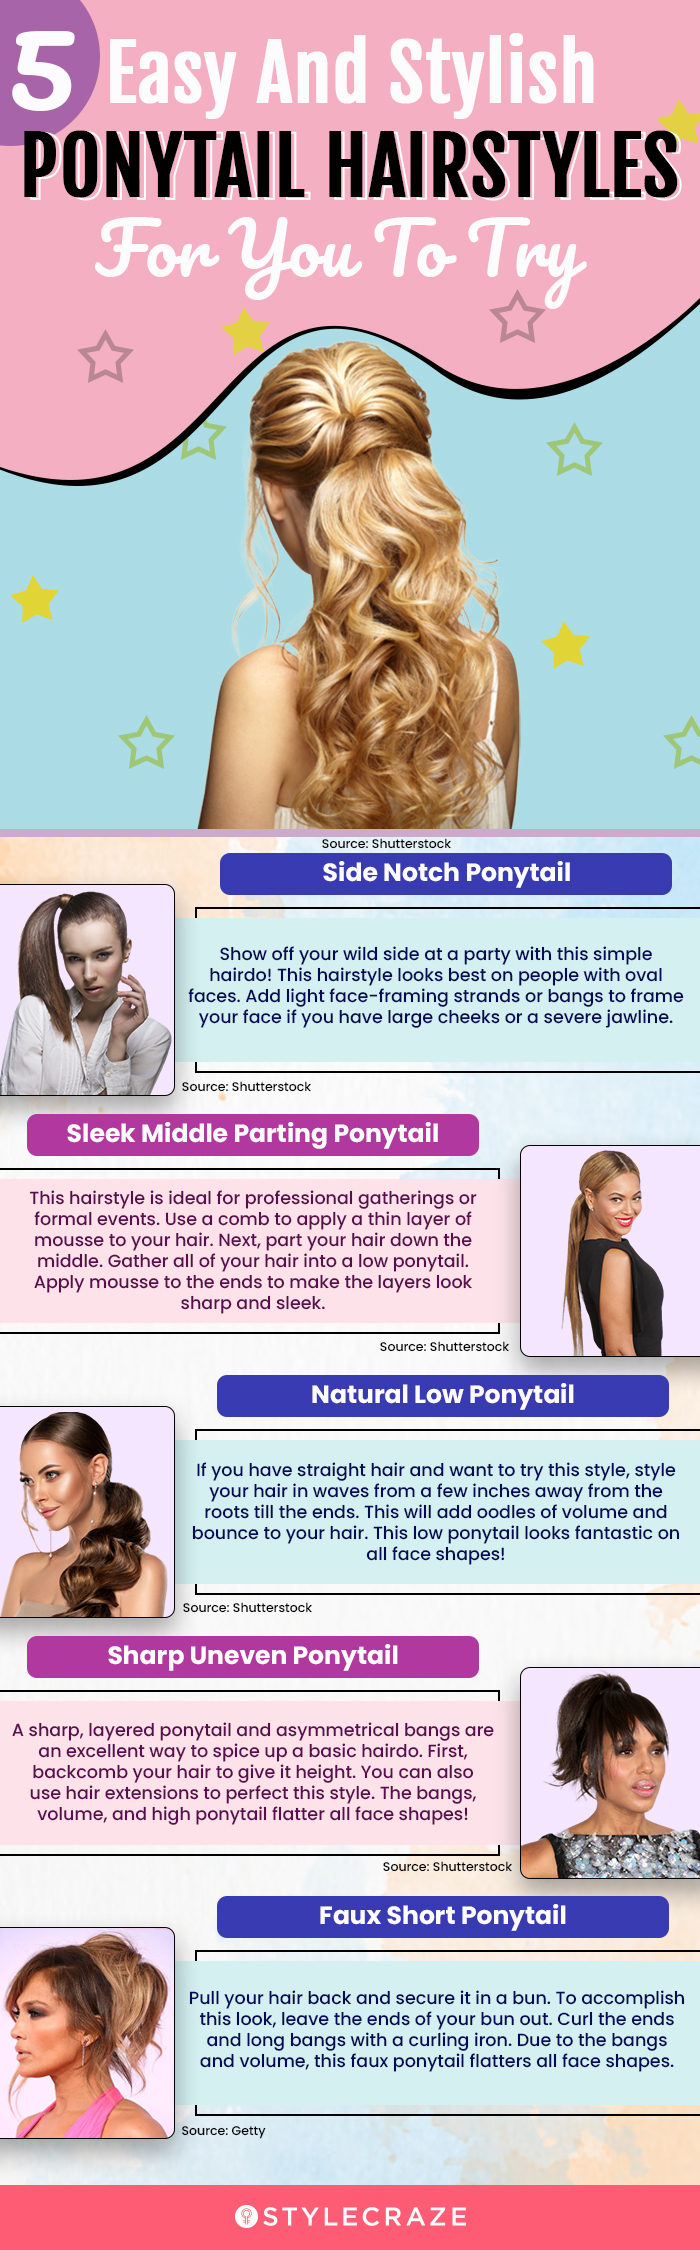 5 easy and stylish ponytail hairstyles for you to try (infographic)